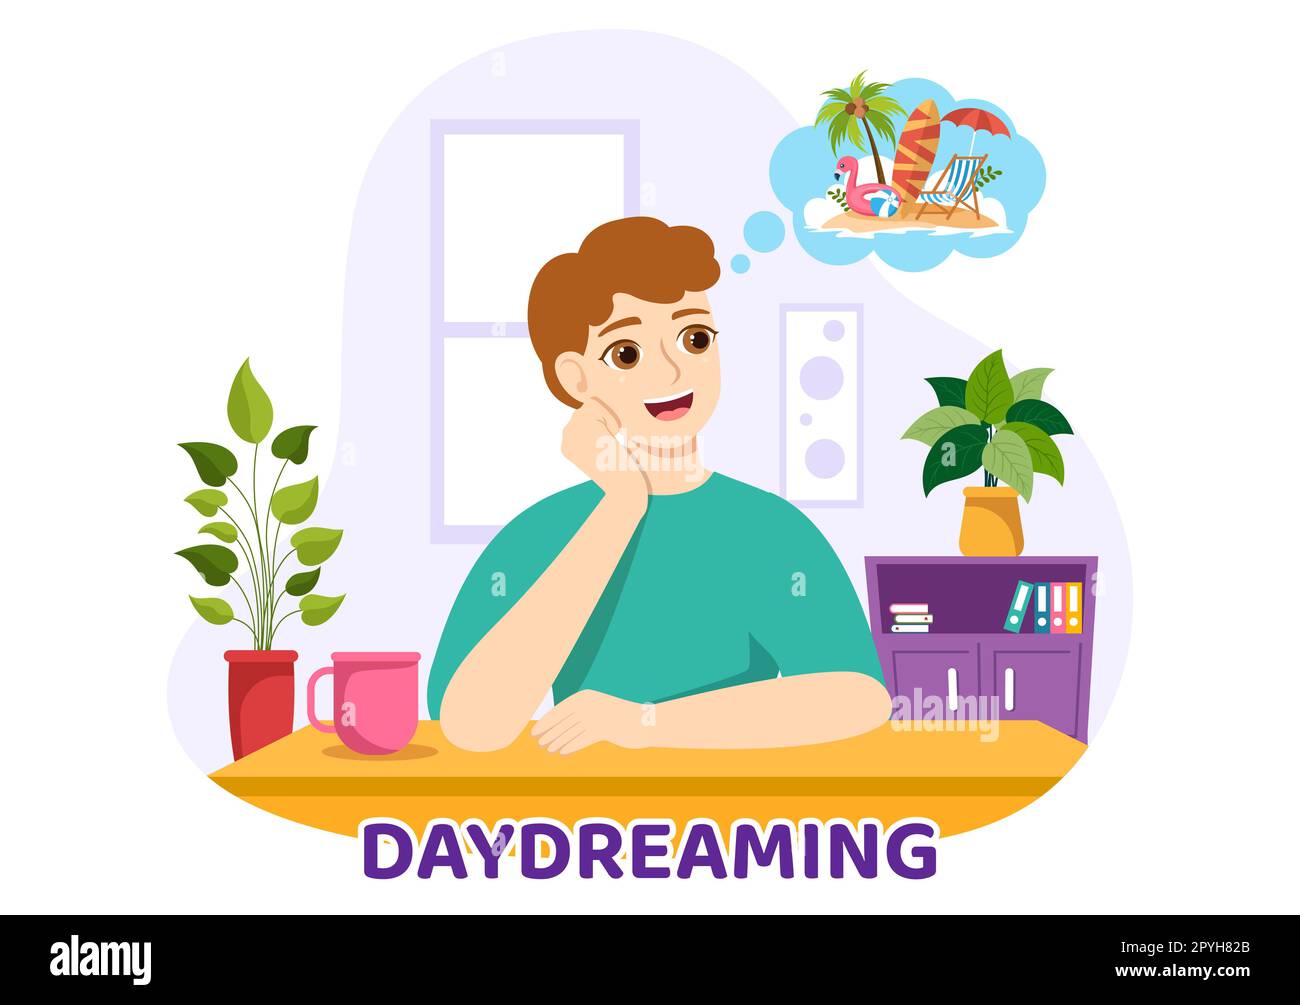 People Daydreaming Illustration with Imagining and Fantasizing in Bubble for Landing Page or Poster Templates in Flat Cartoon Hand Drawn Stock Photo